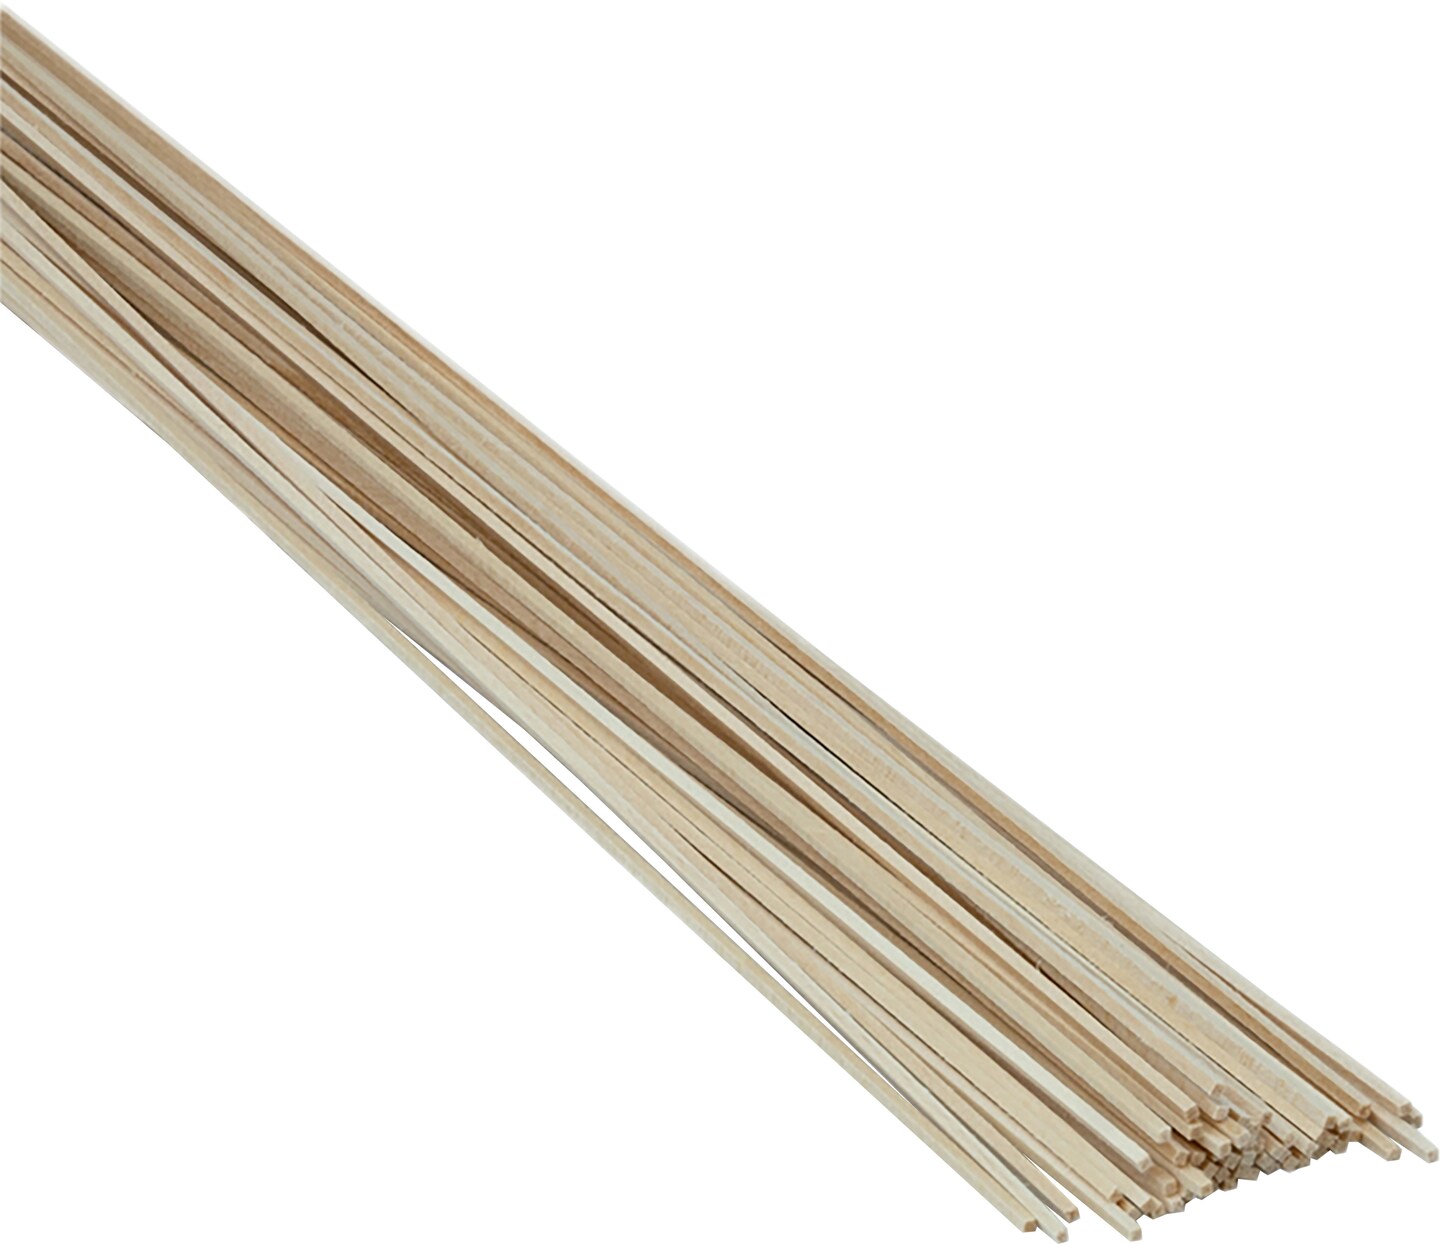 Midwest Products Basswood Strip 24